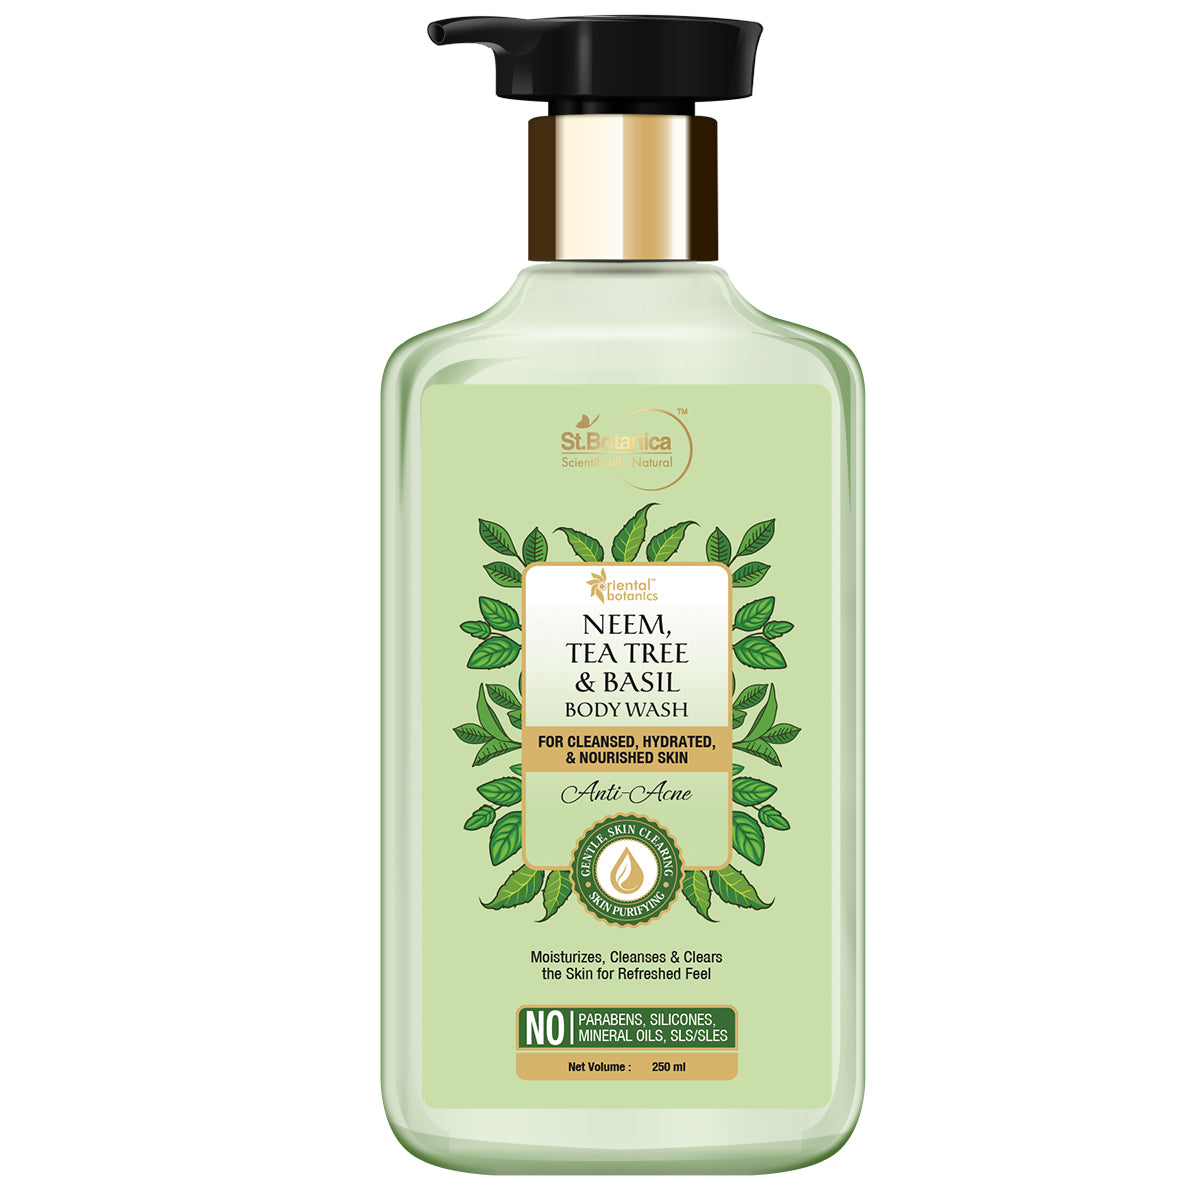 Oriental Botanics Neem, Tea Tree And Basil Anti Acne Body Wash, For Cleansed, Hydrated And Nourished Skin, No Parabens, Silicones, 250 ml